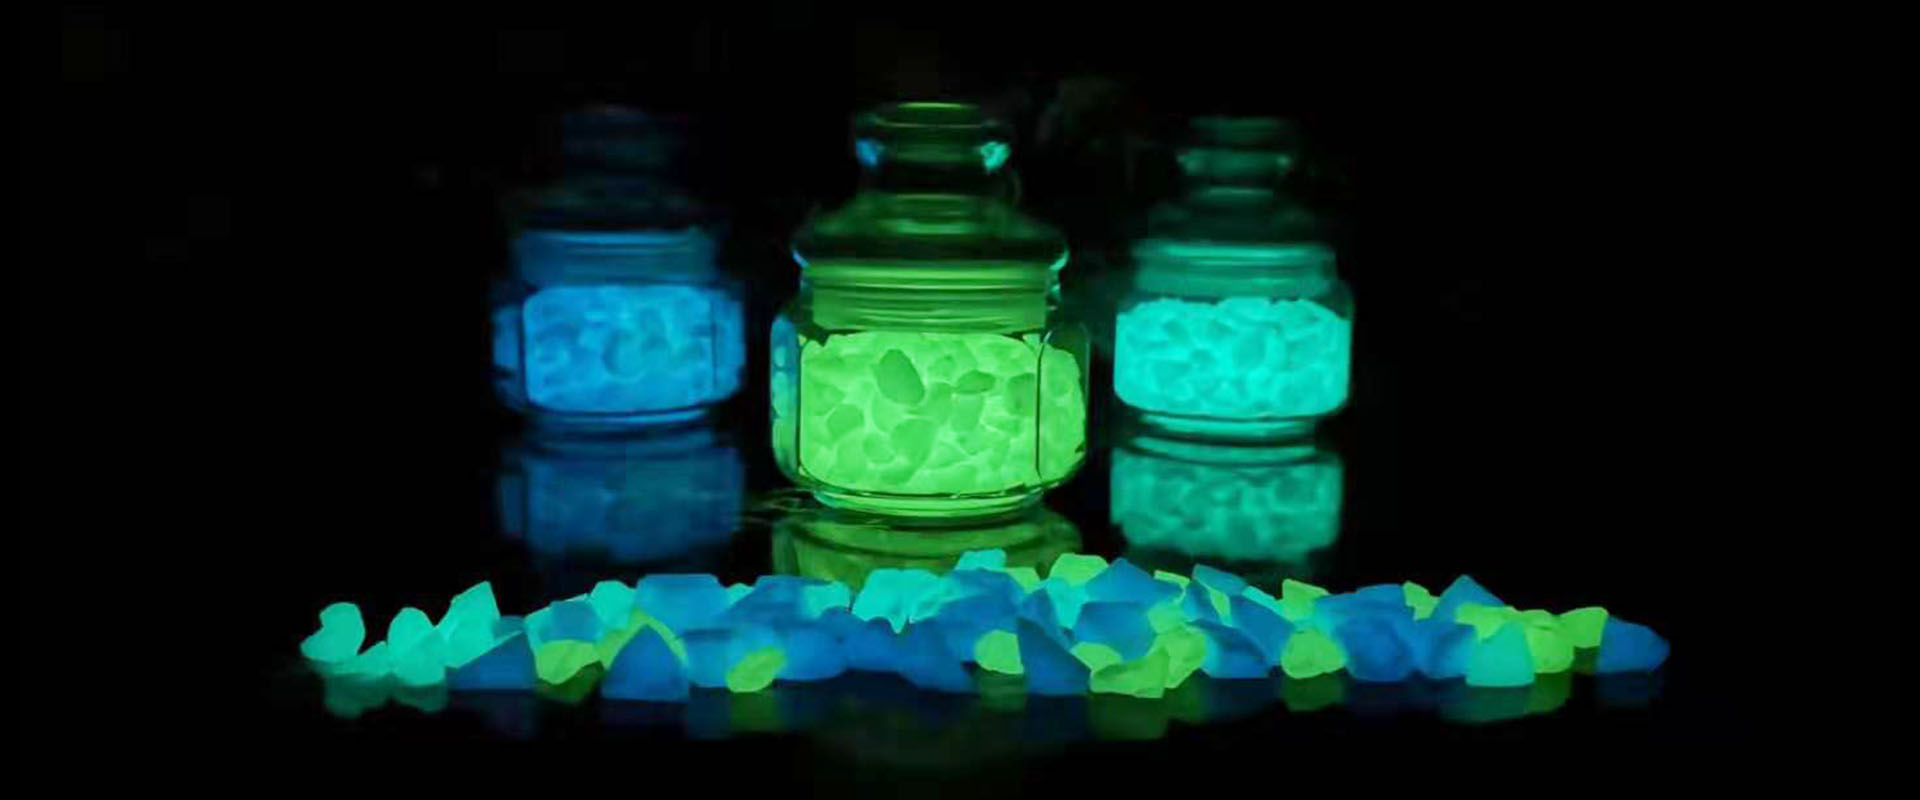 colorful-glow-in-the-dark-stone